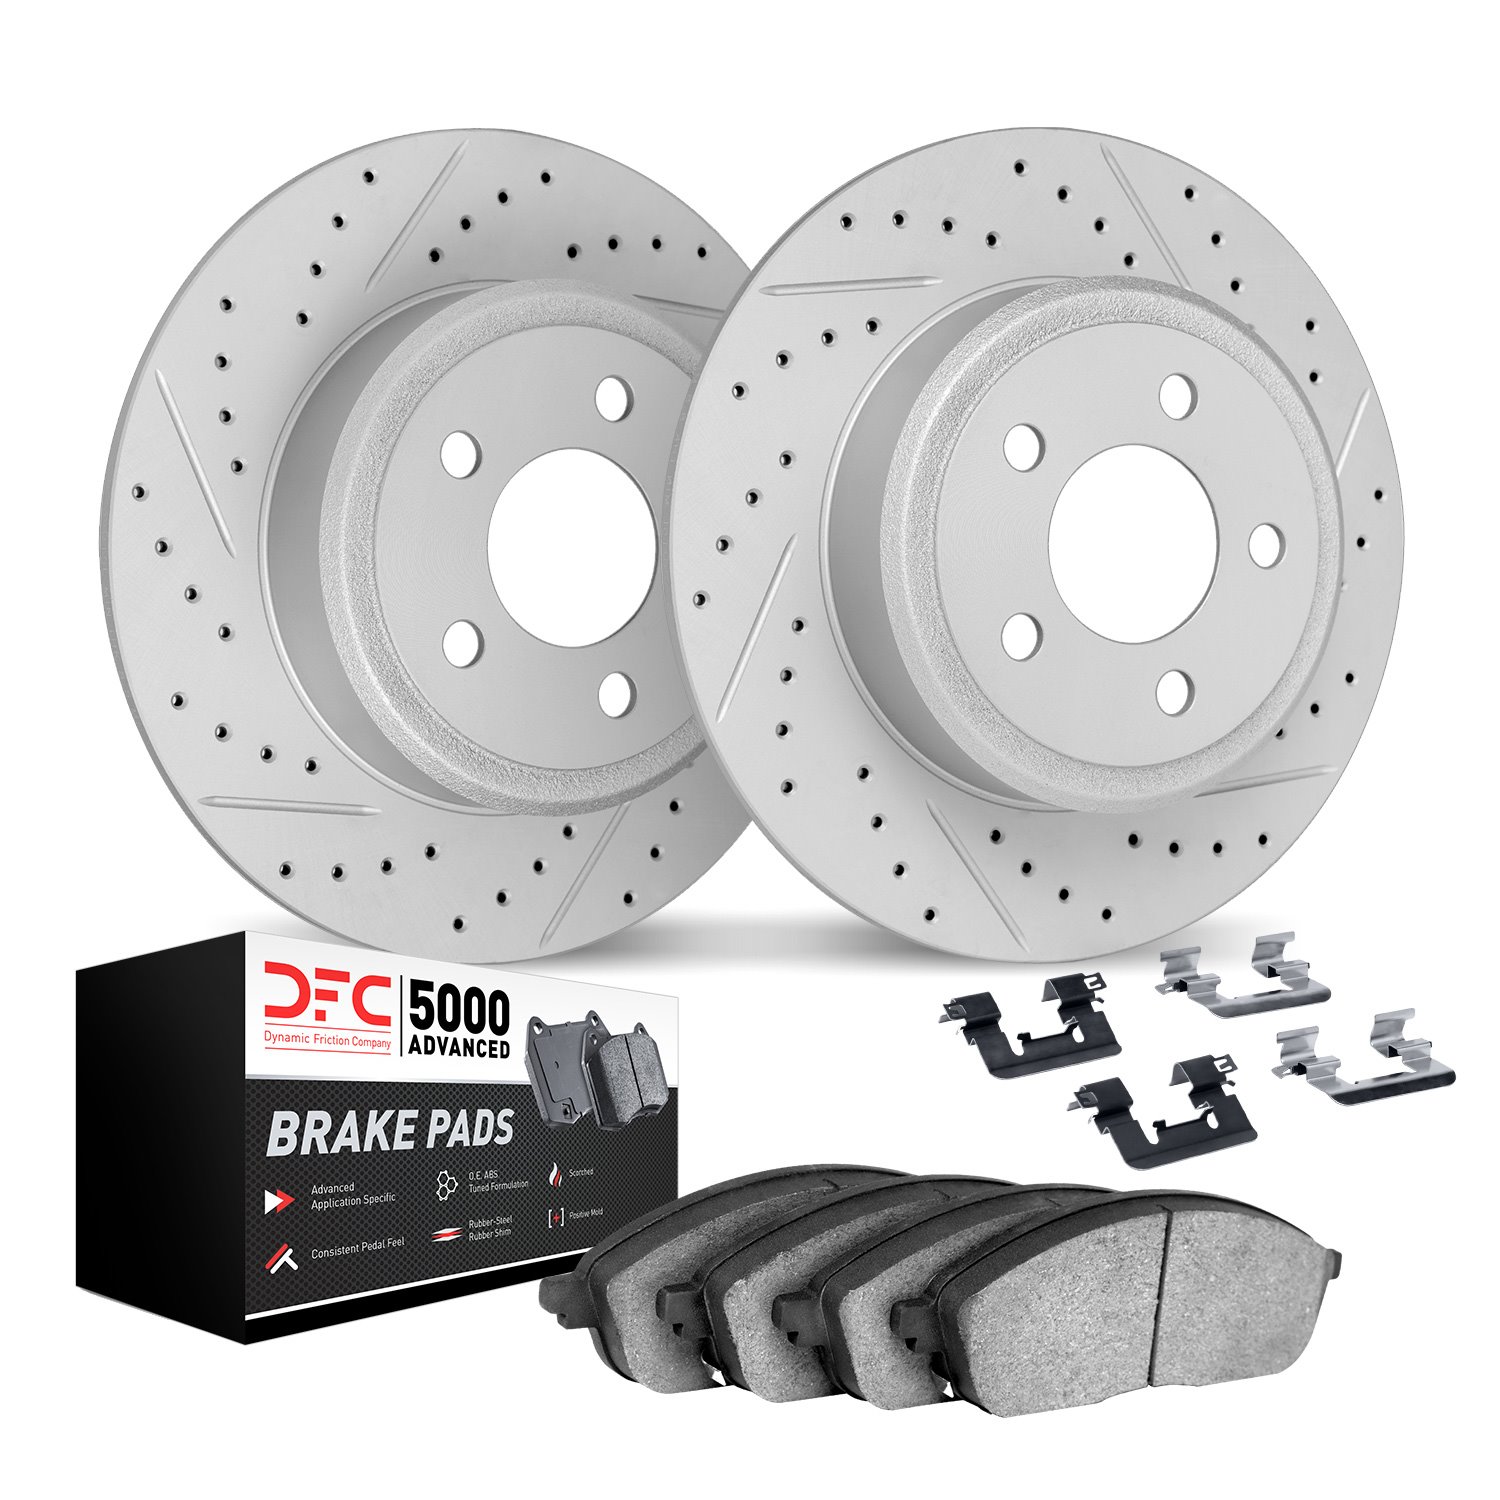 2512-59104 Geoperformance Drilled/Slotted Rotors w/5000 Advanced Brake Pads Kit & Hardware, Fits Select Acura/Honda, Position: R